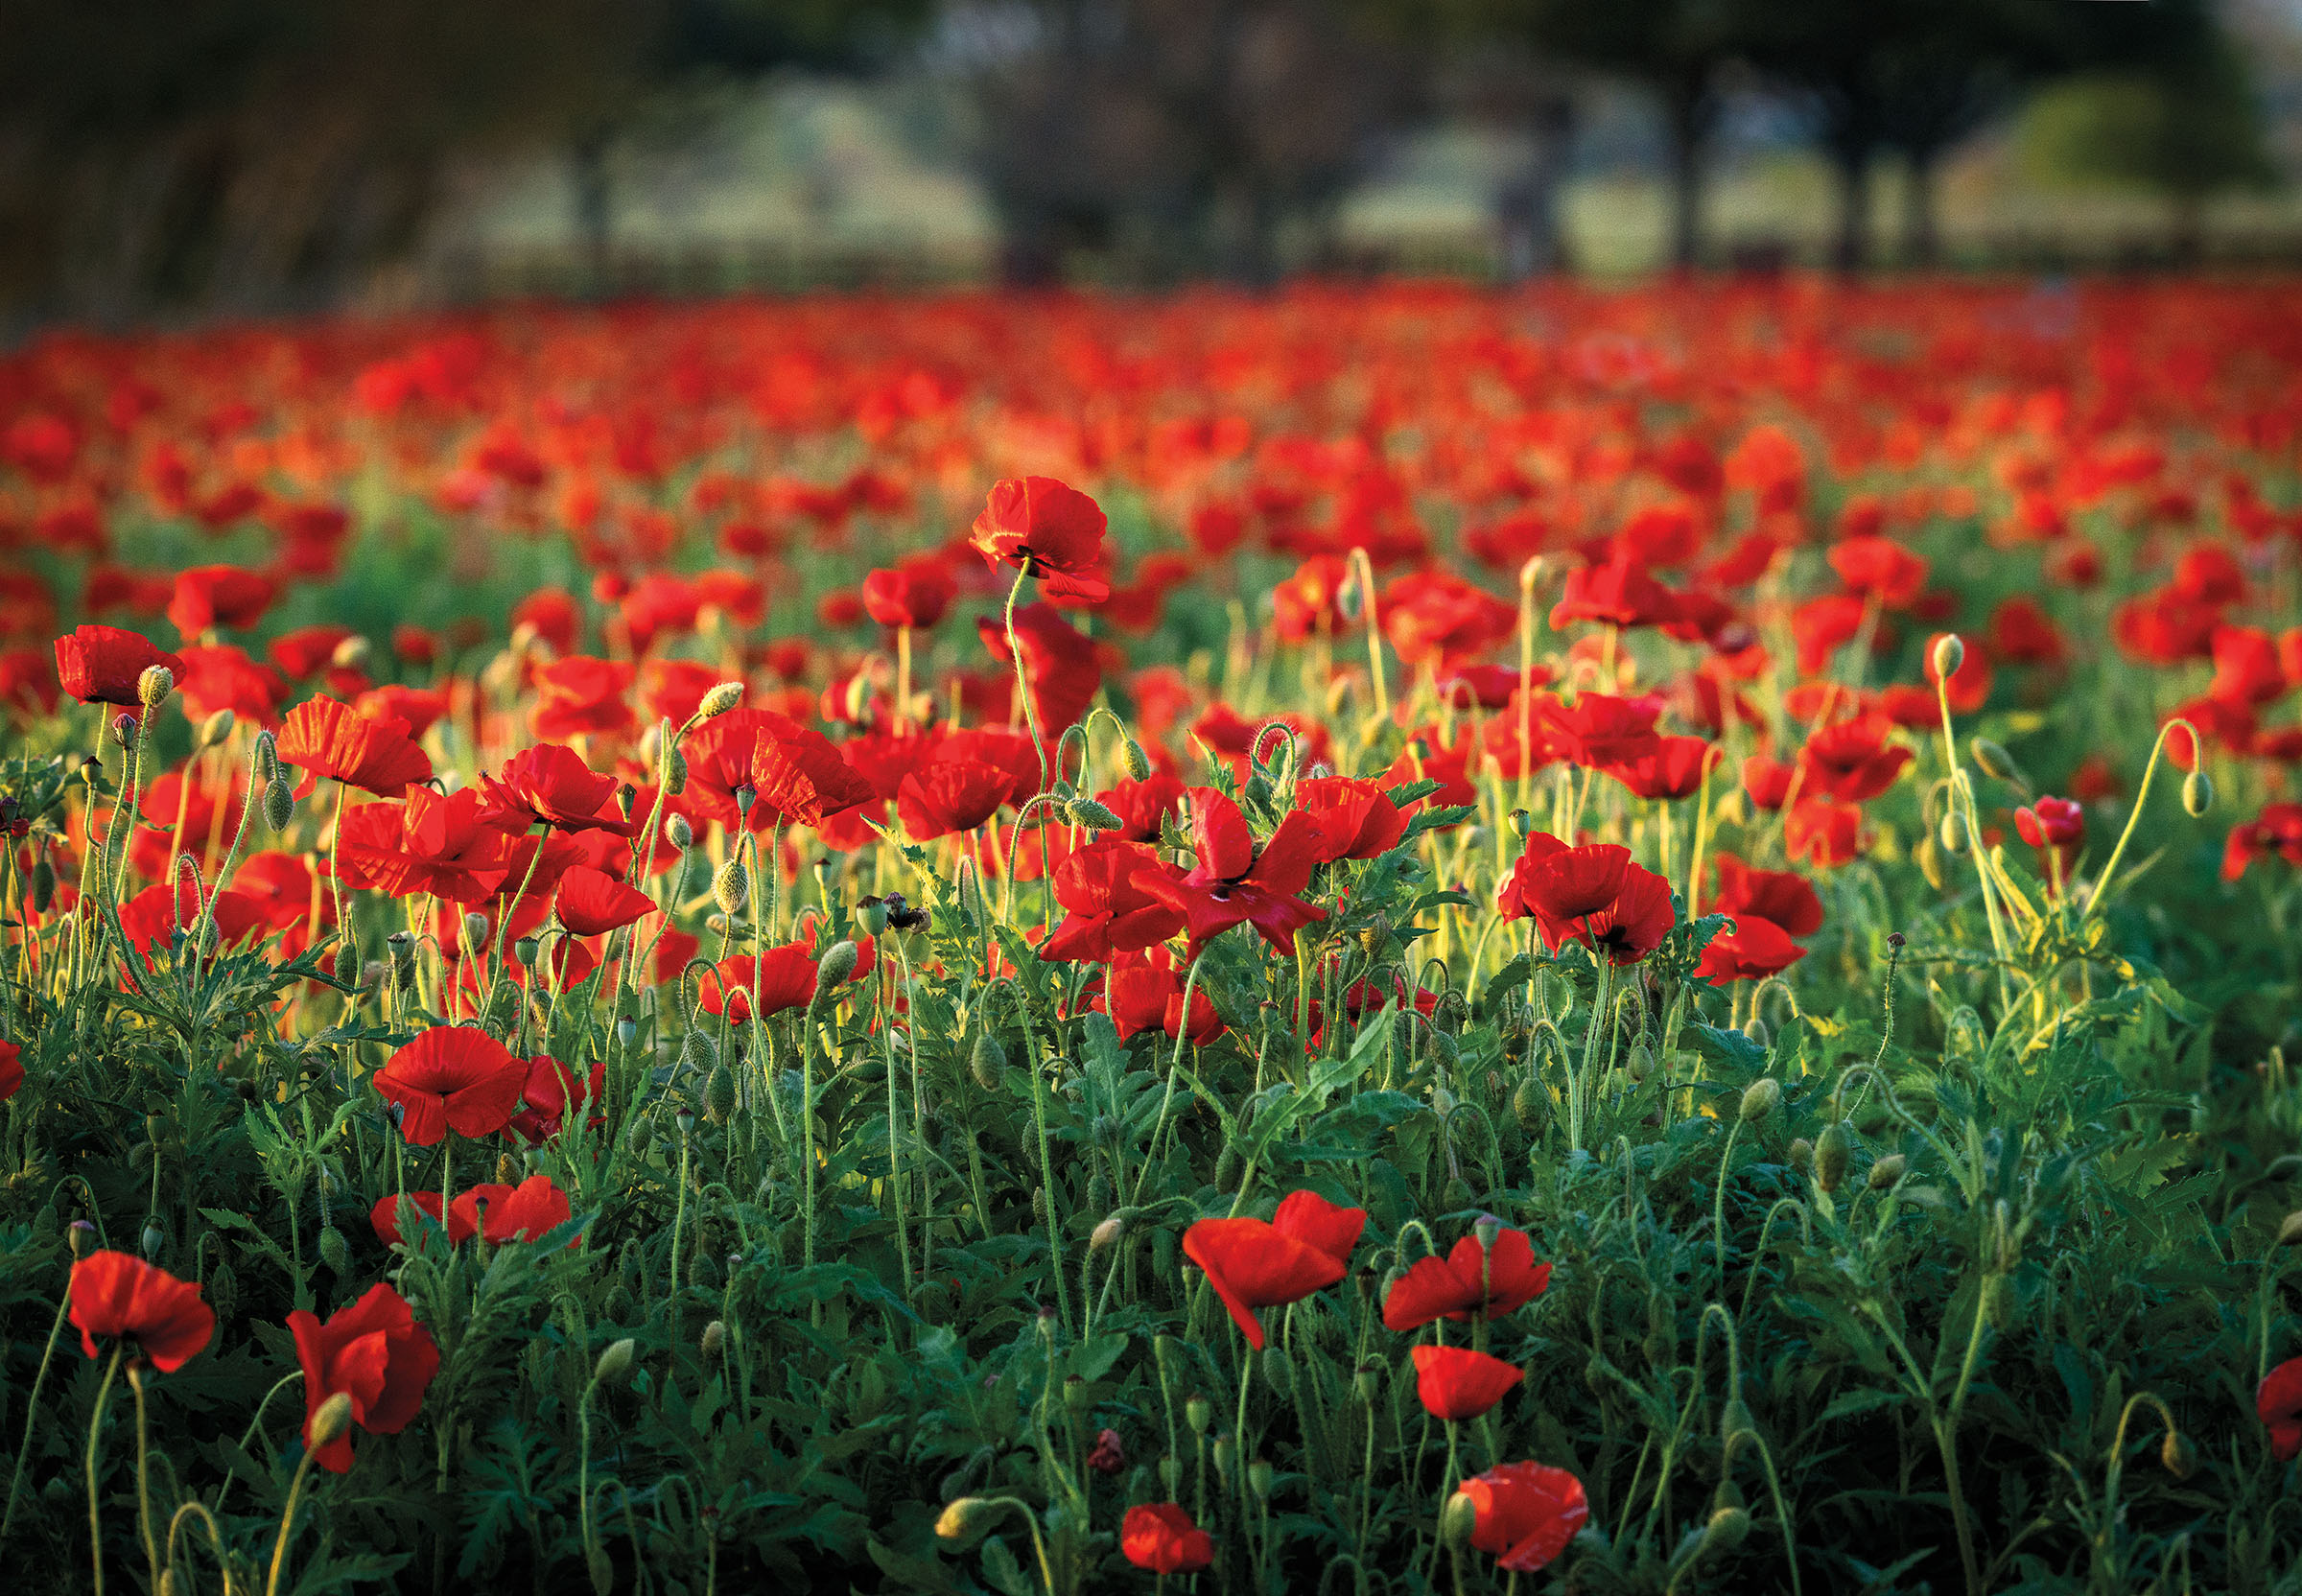 Bright red poppies with green stems and flowers in a field